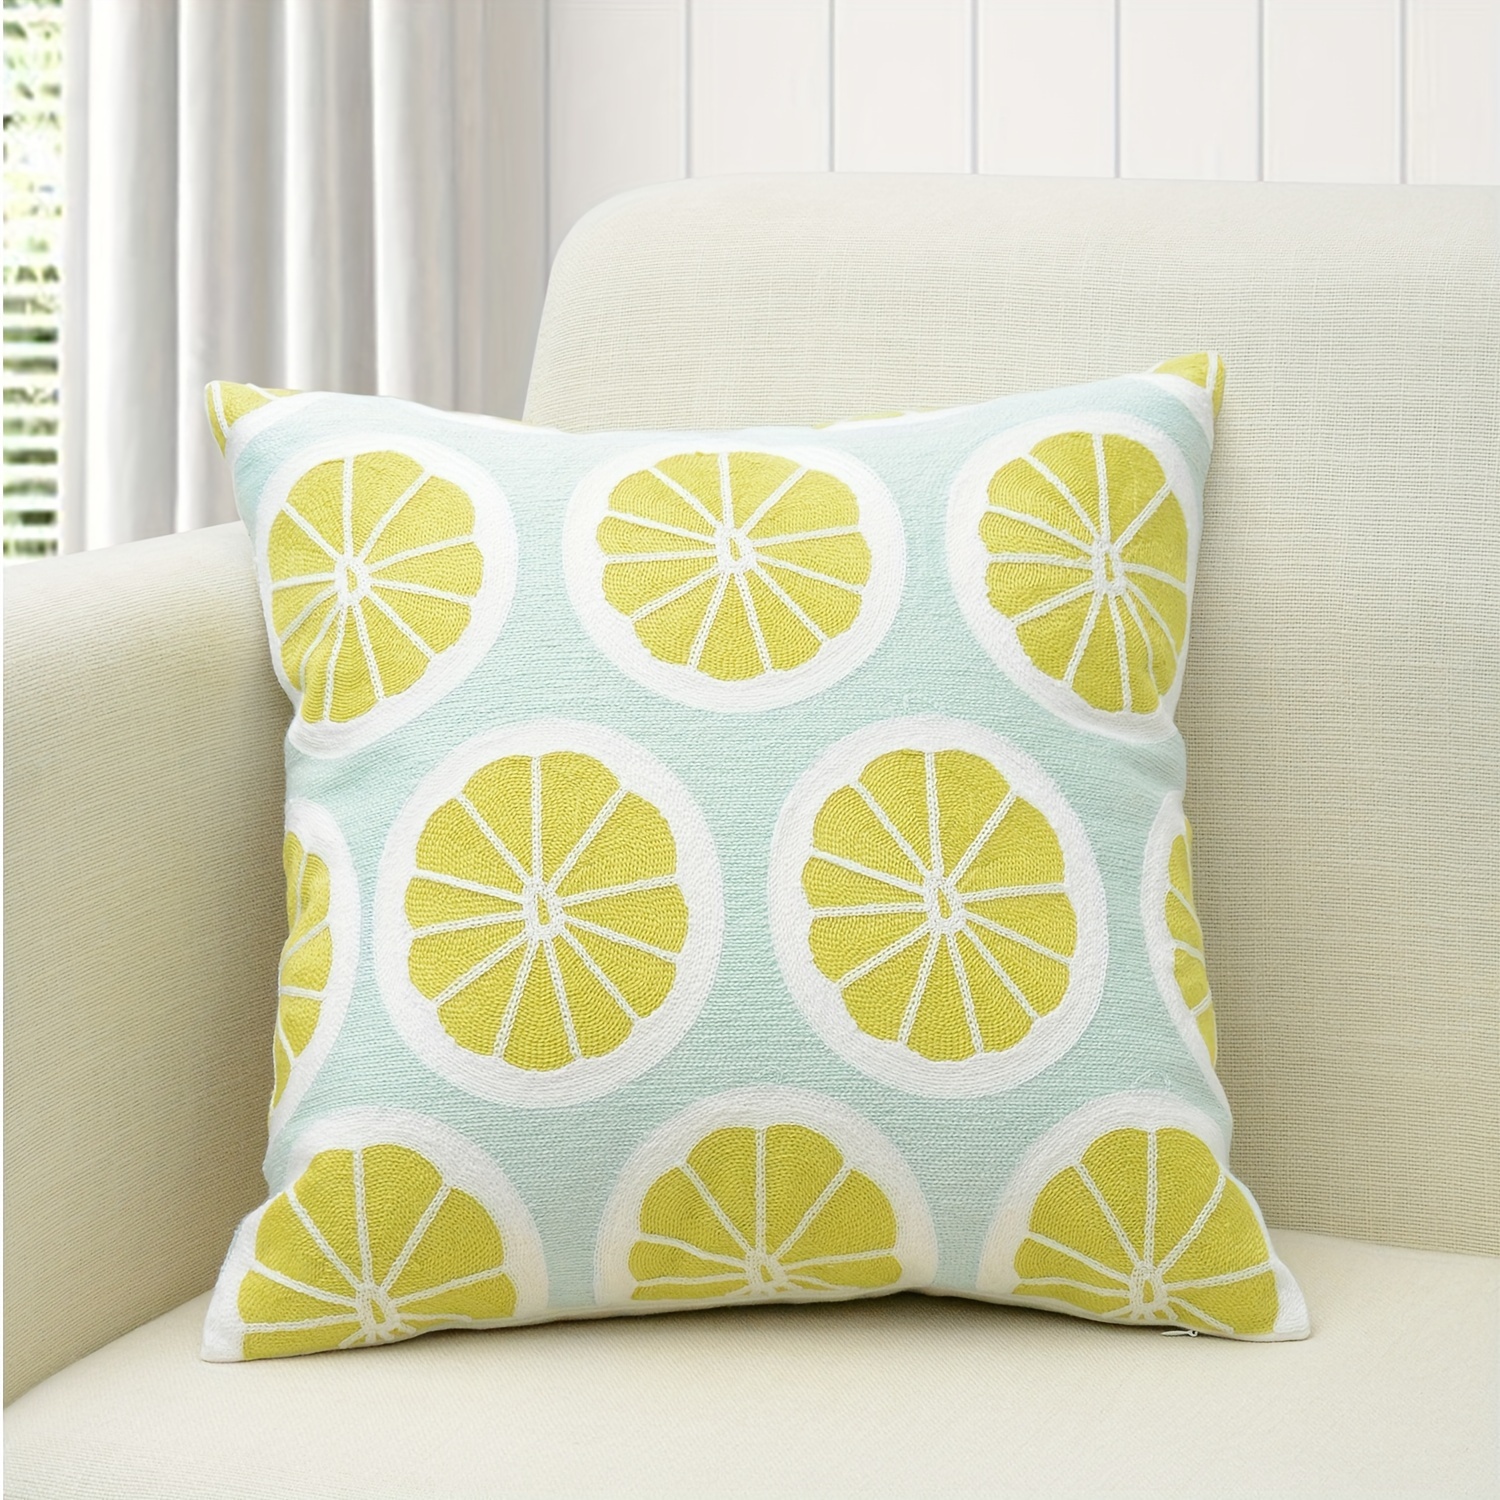 

Contemporary Lemon Embroidered Throw Pillow Cover, 100% Cotton Woven Cushion Case With Zipper Closure, Machine Washable, Fits Various Room Types - 1pc